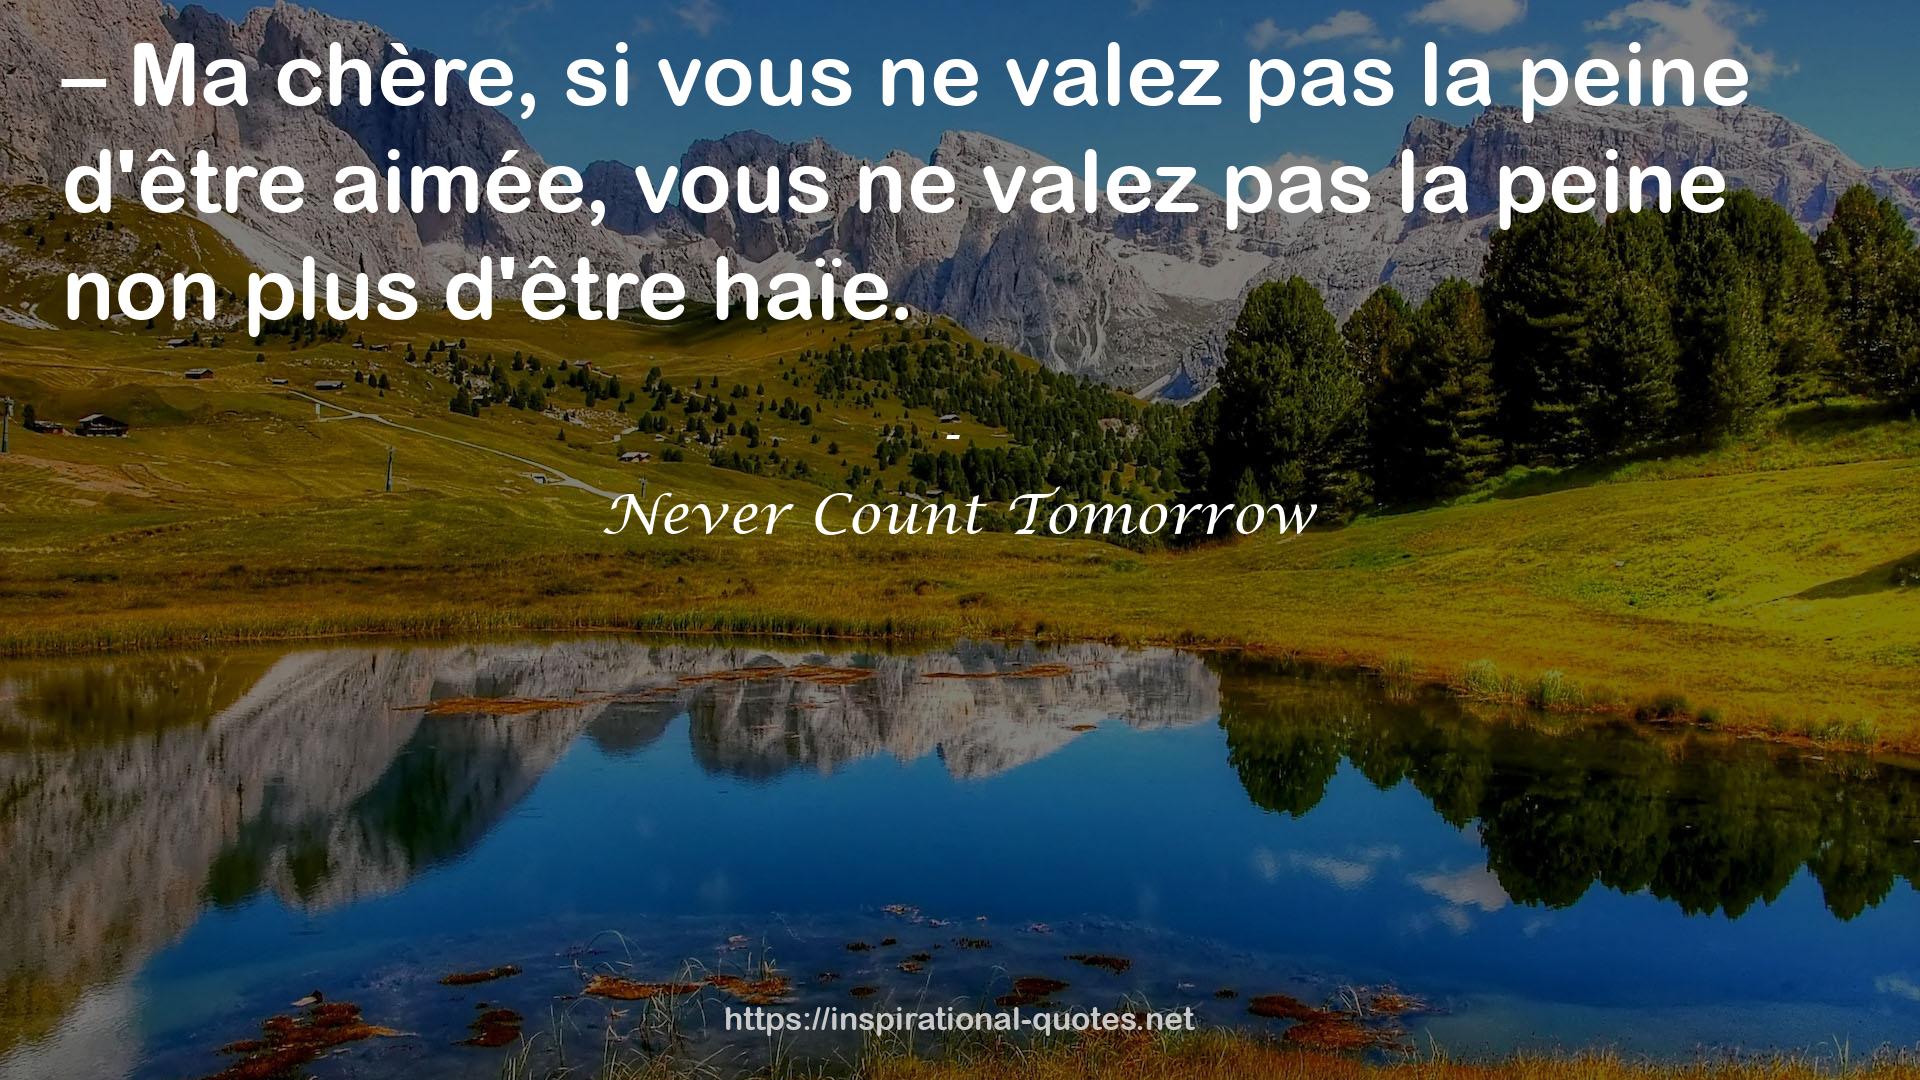 Never Count Tomorrow QUOTES